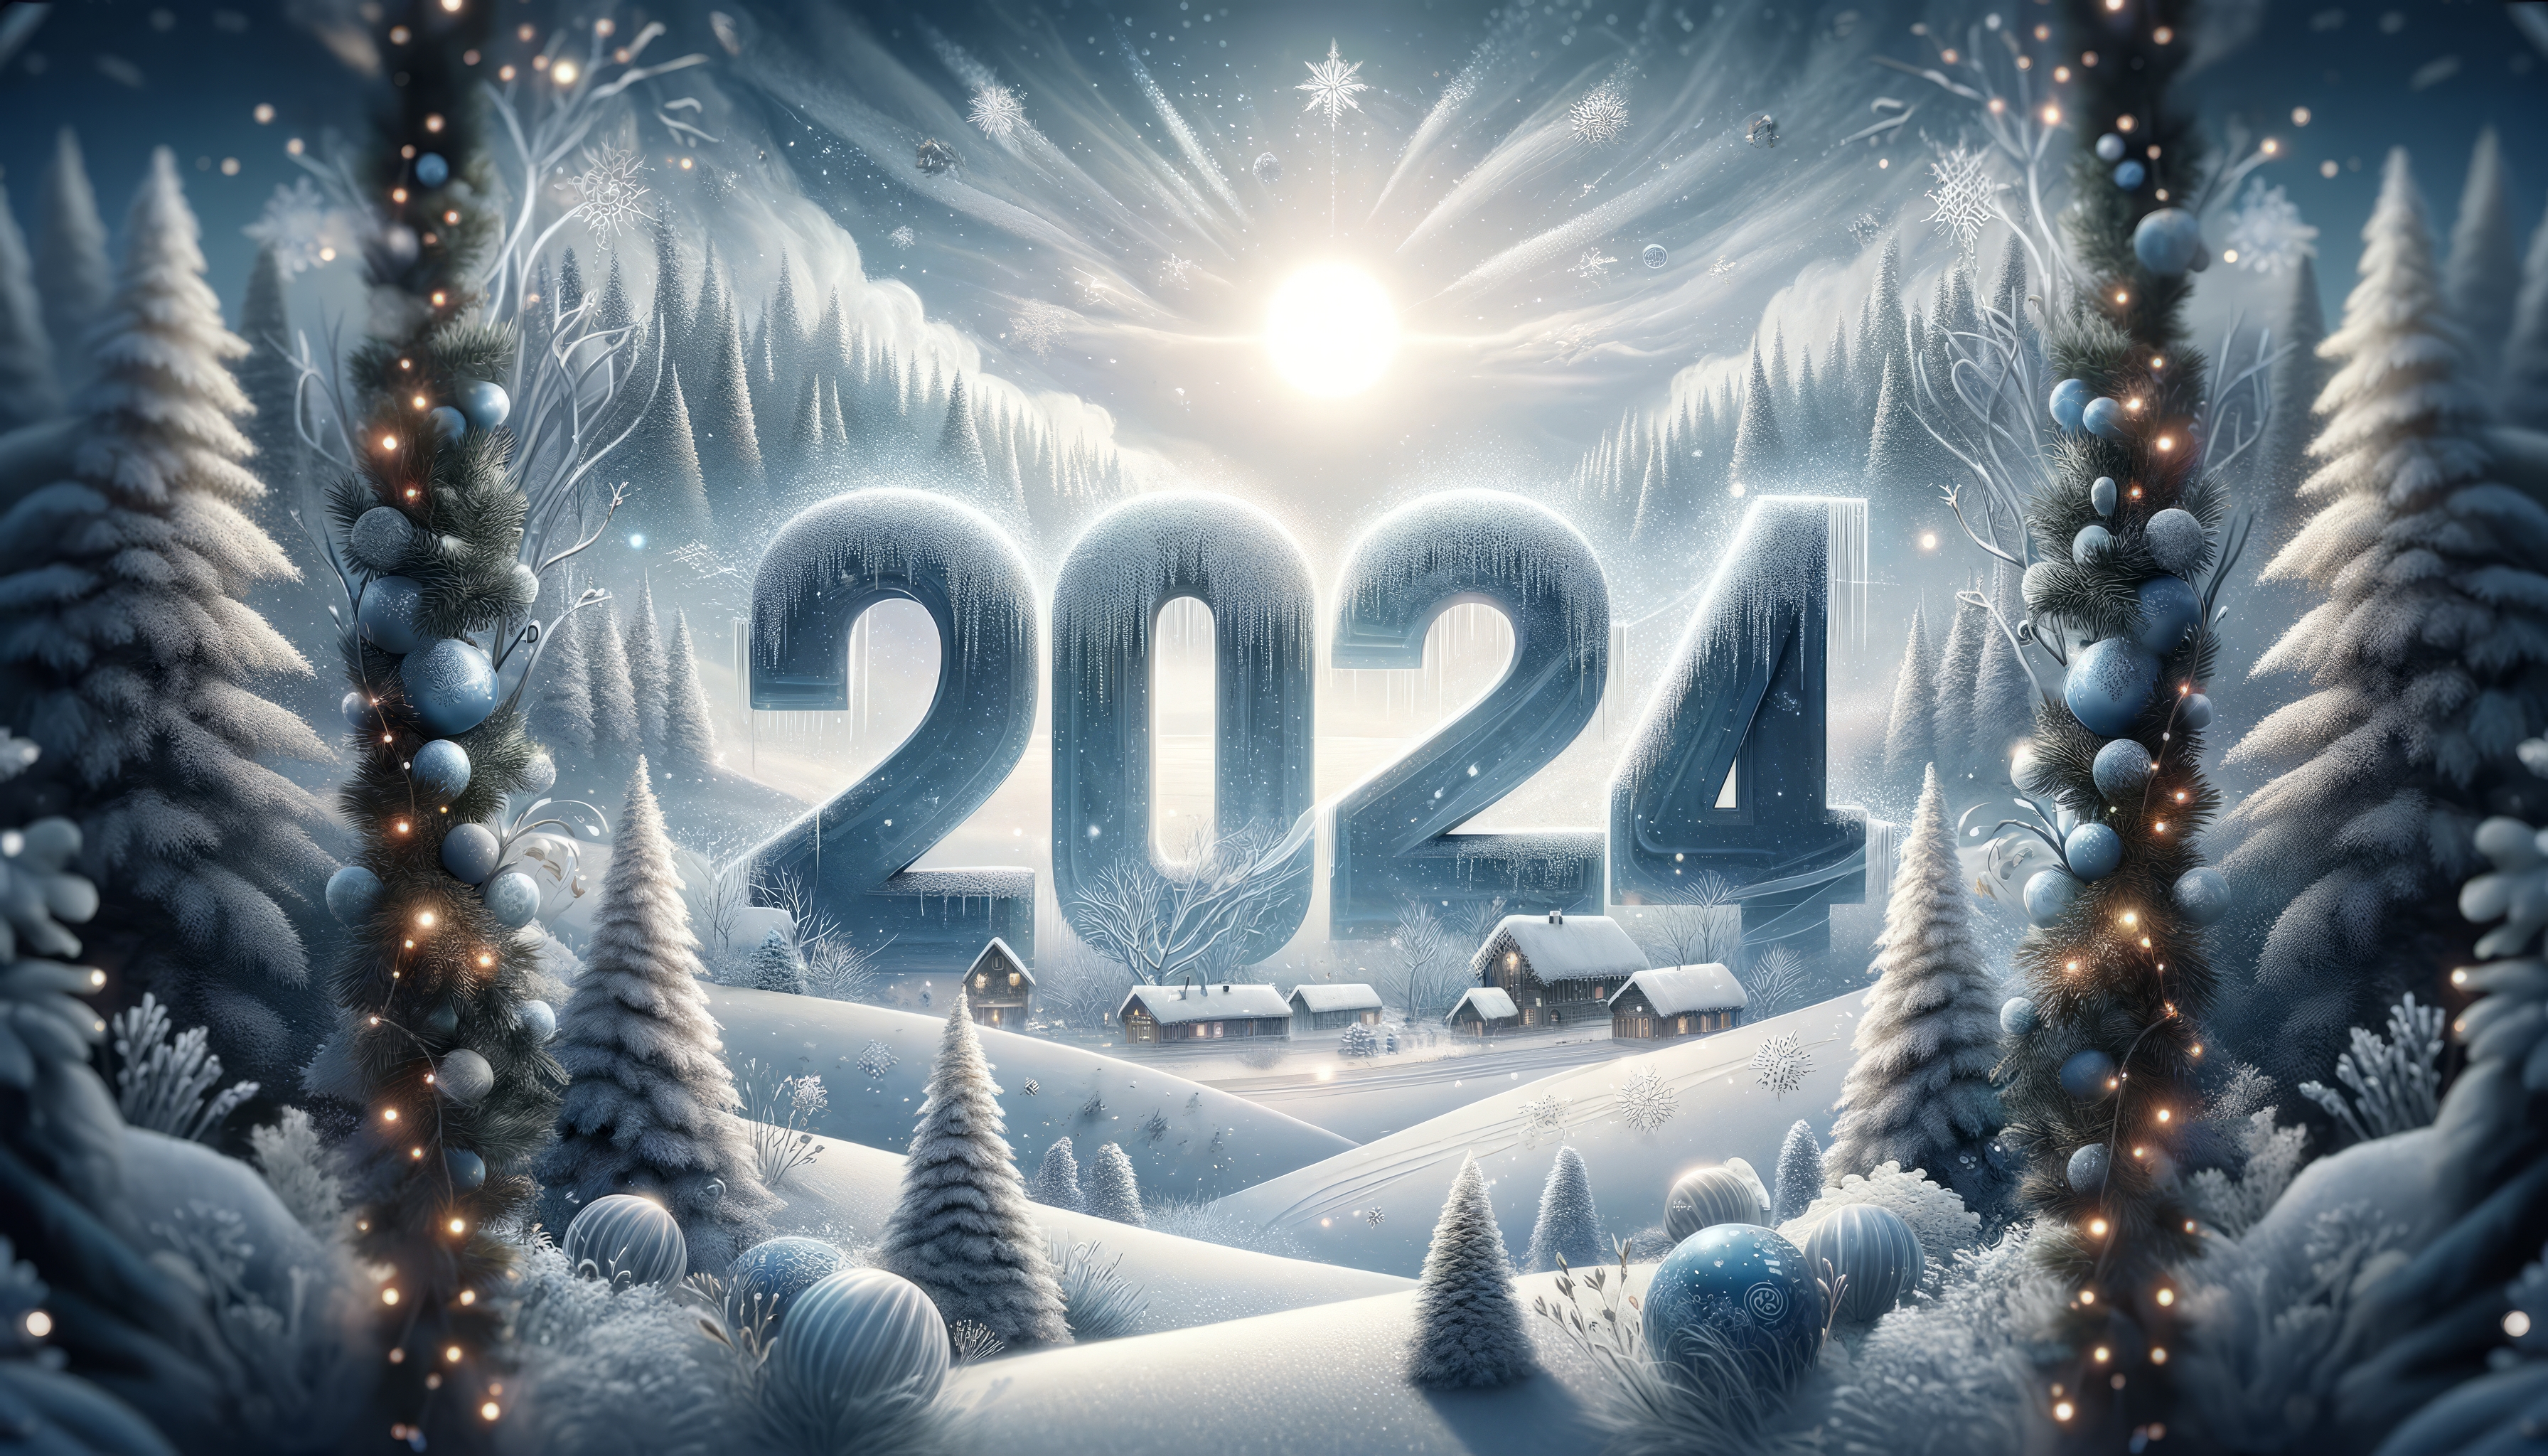 HD wallpaper of a snowy winter wonderland with large 2024 sign for desktop background.